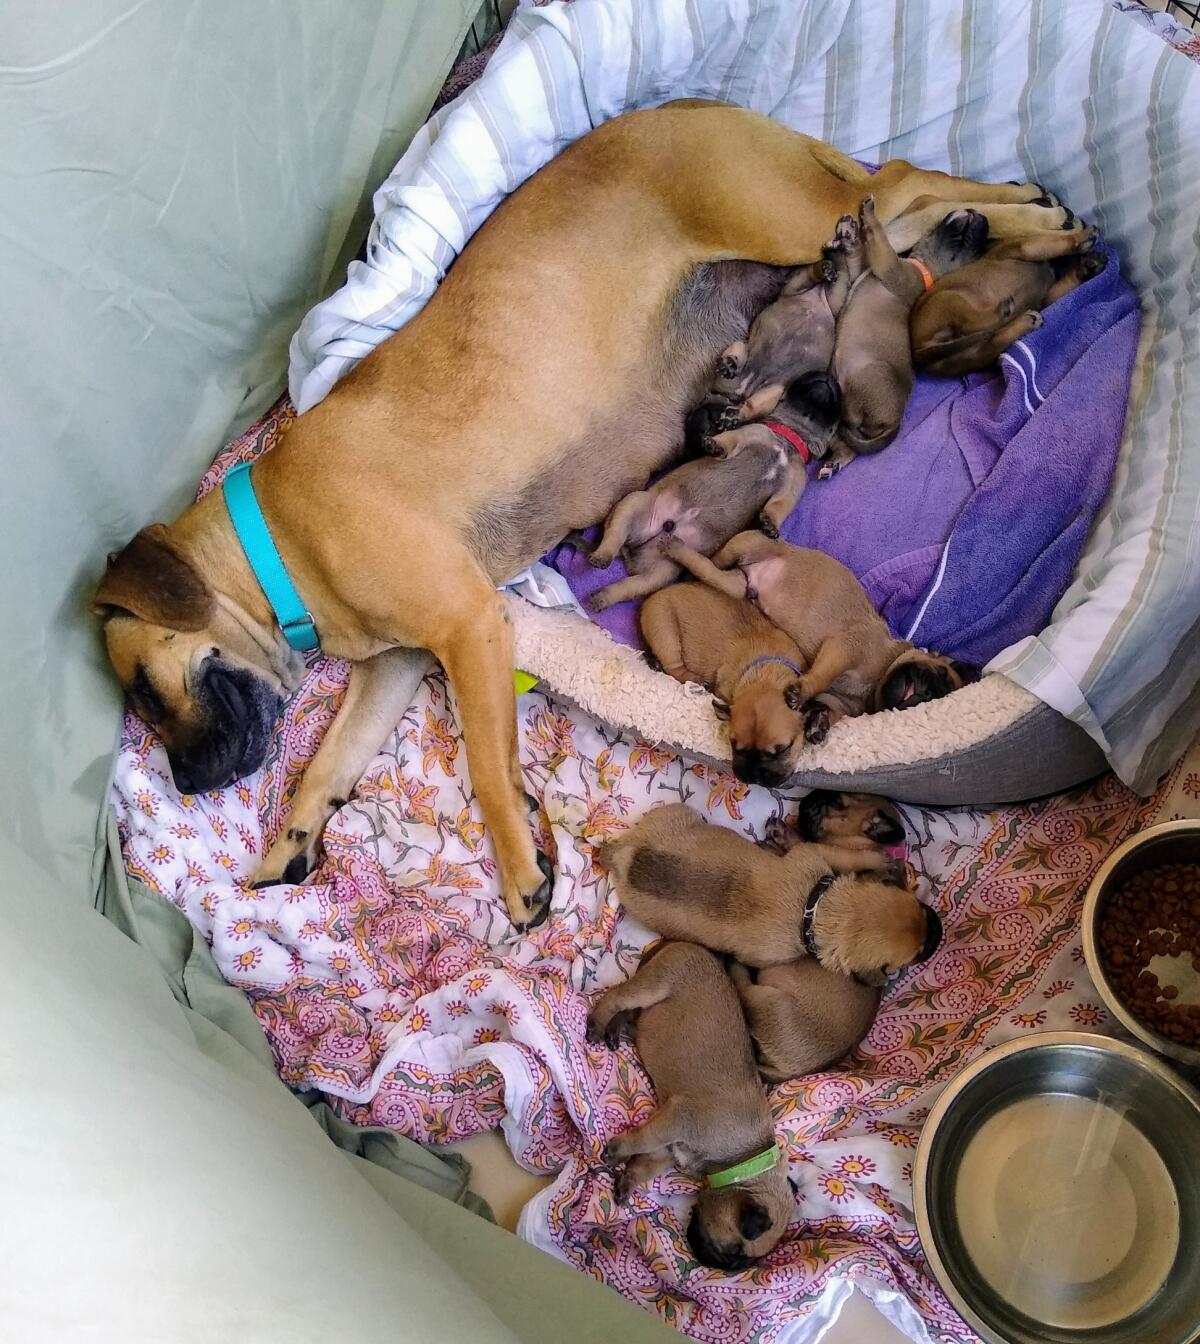 The San Diego Humane Society is looking for names for the nine puppies rescued last month along with their mom.